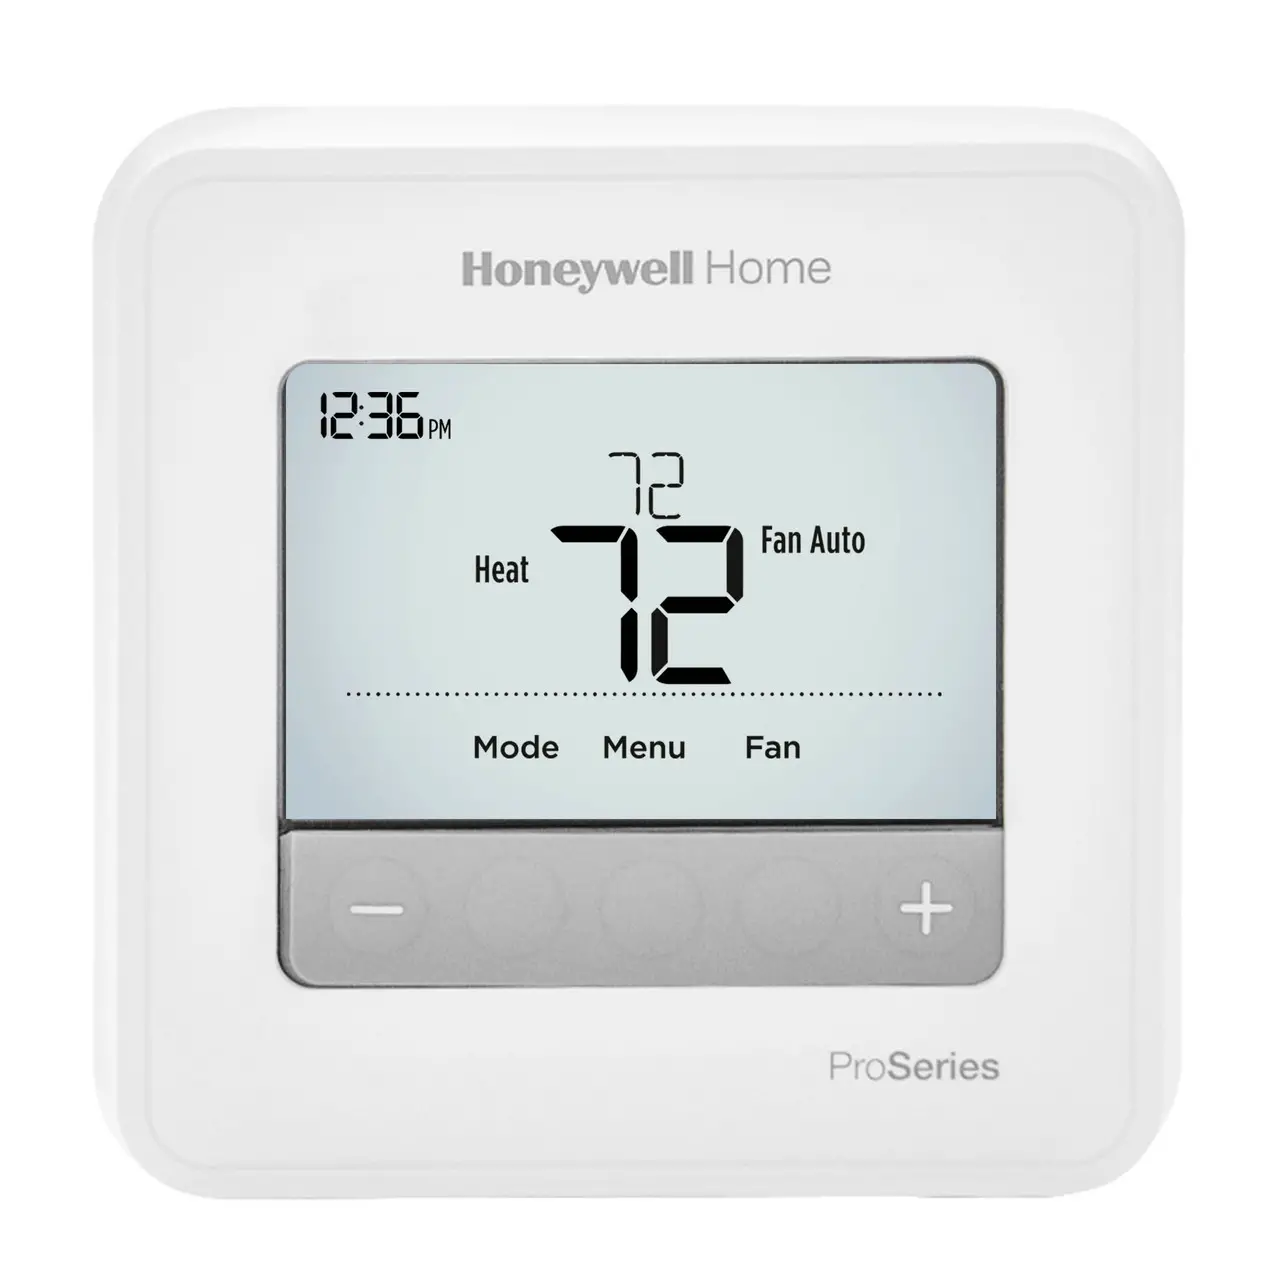 Honeywell Home T4 Pro Thermostat User Manual